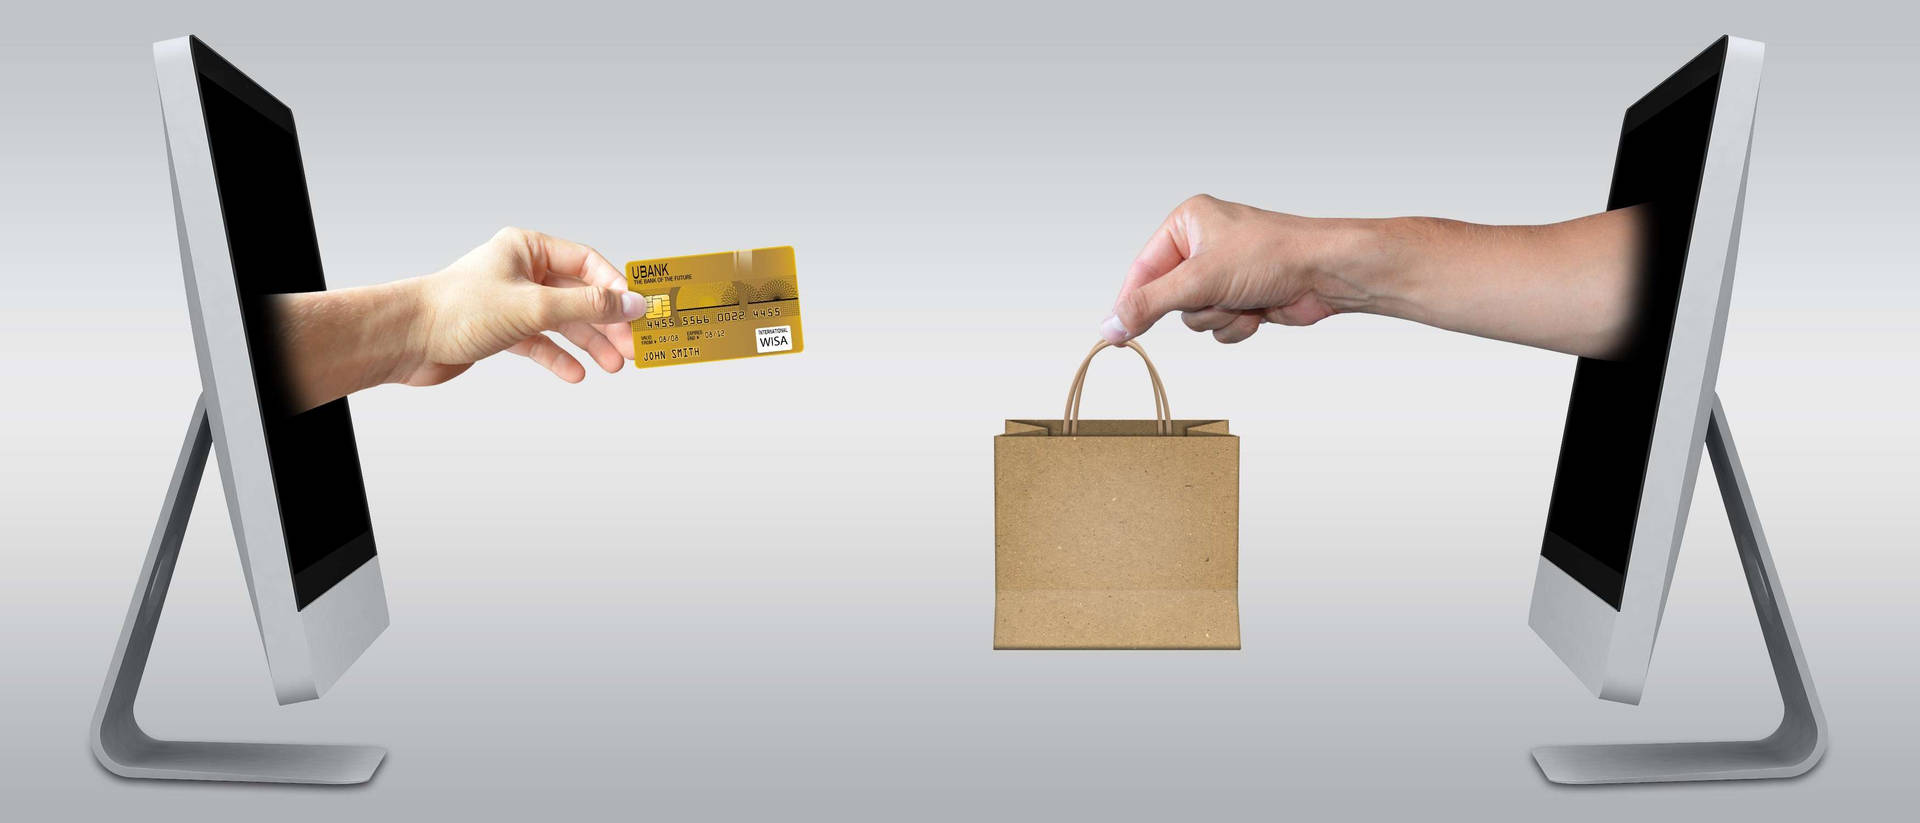 Buying Products Online Shopping Card Delivery Picture